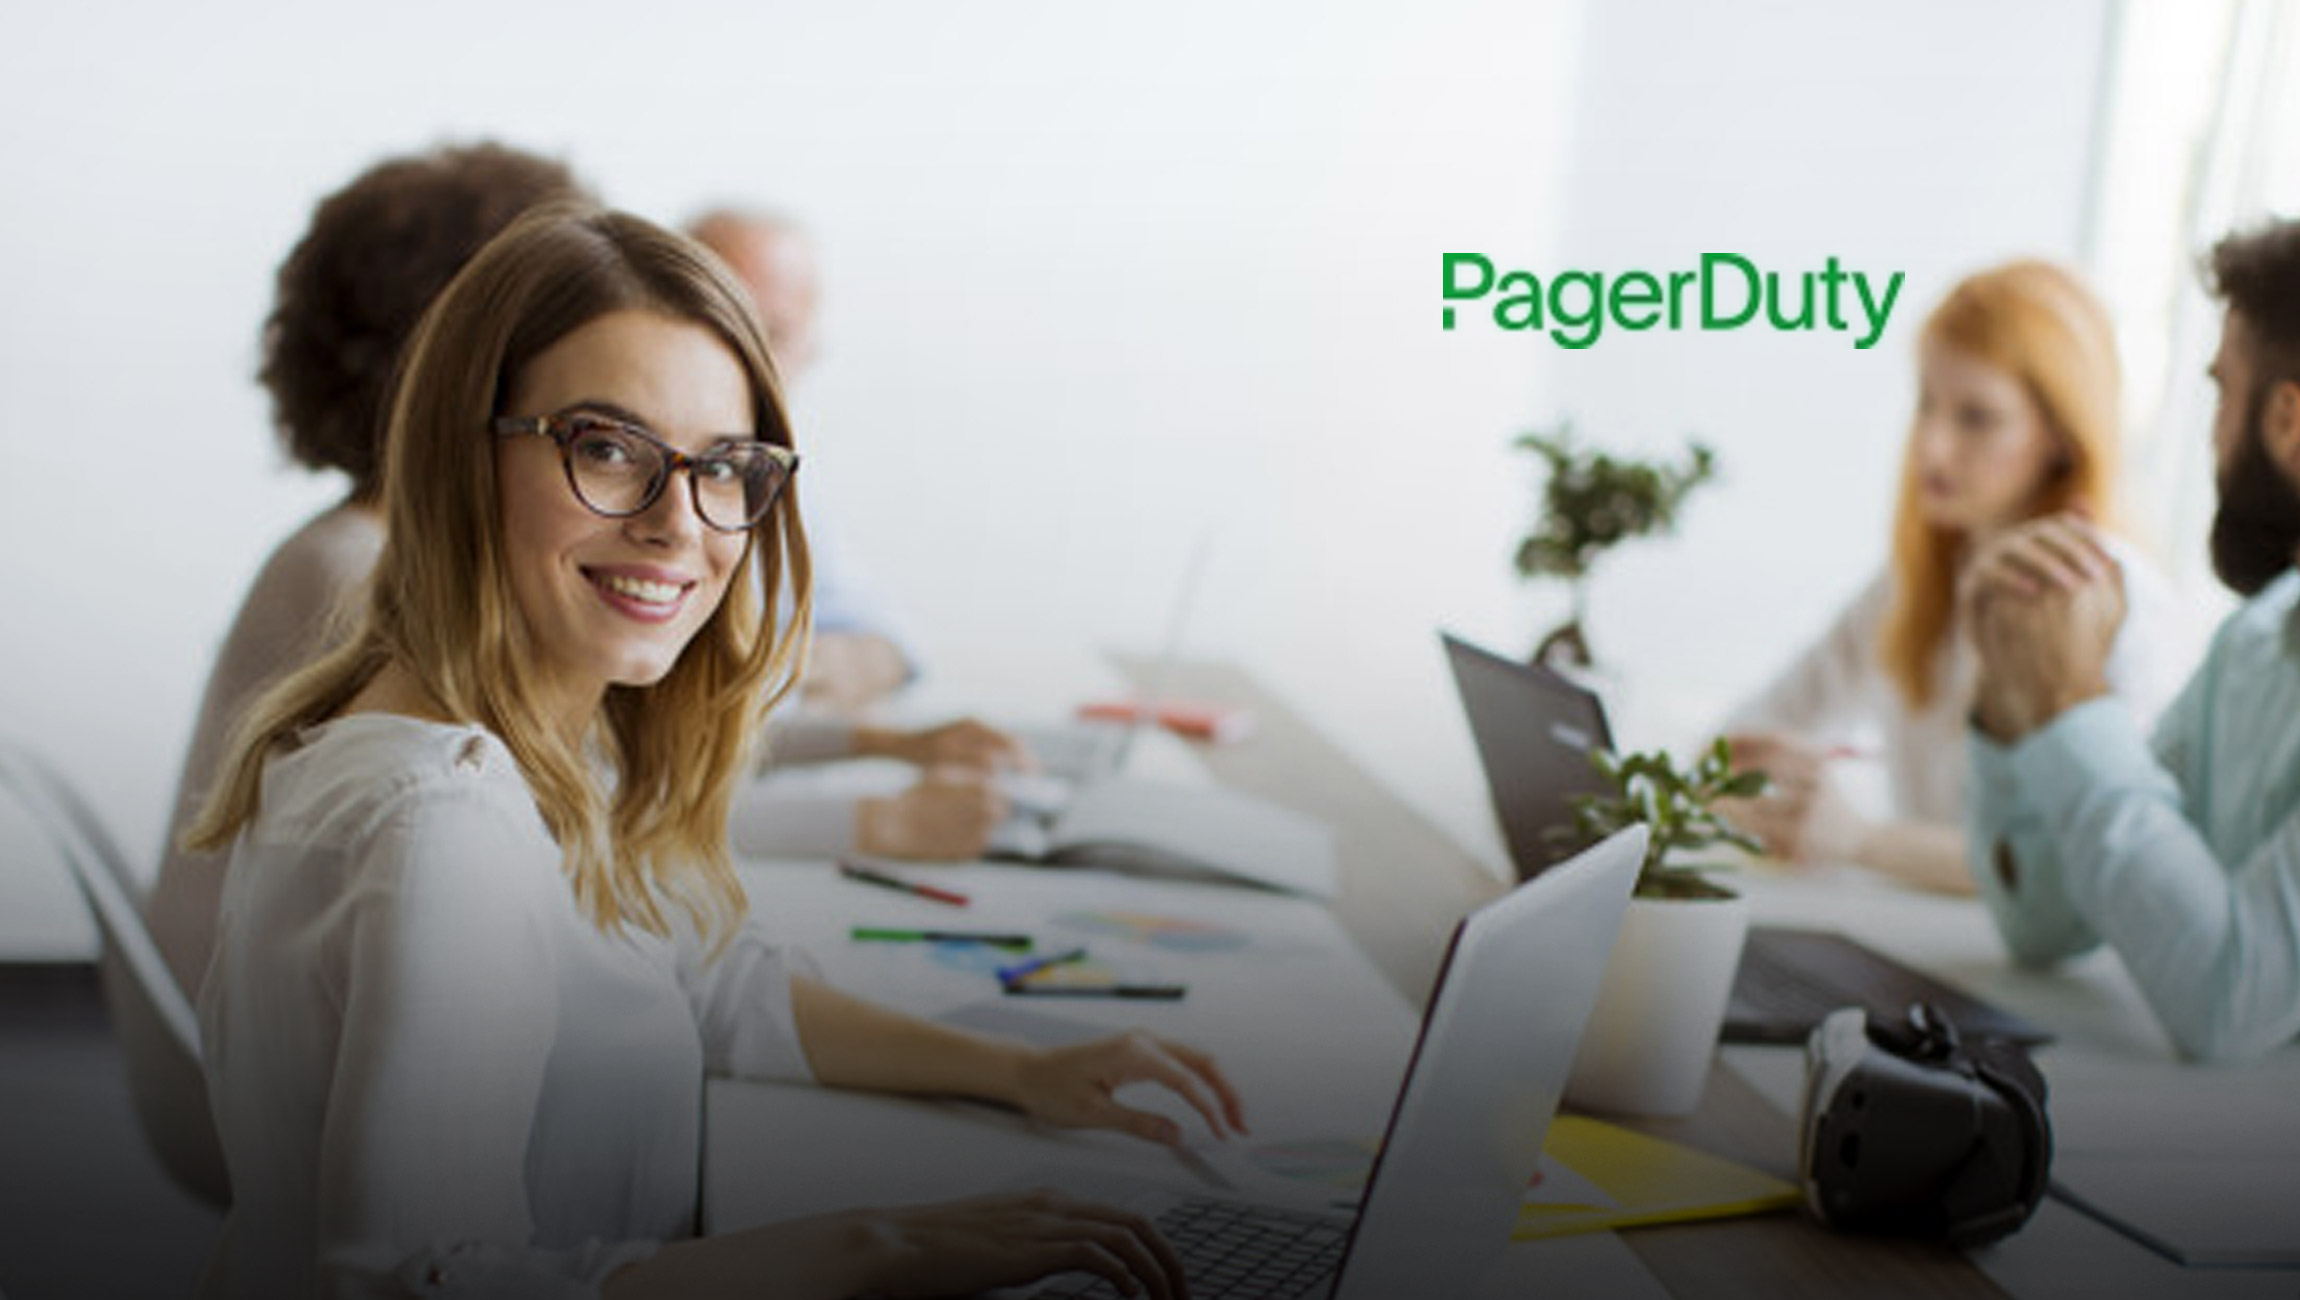 PagerDuty Expands Portfolio With Products Designed to Drive Automation Across Capacity-Strained Enterprises